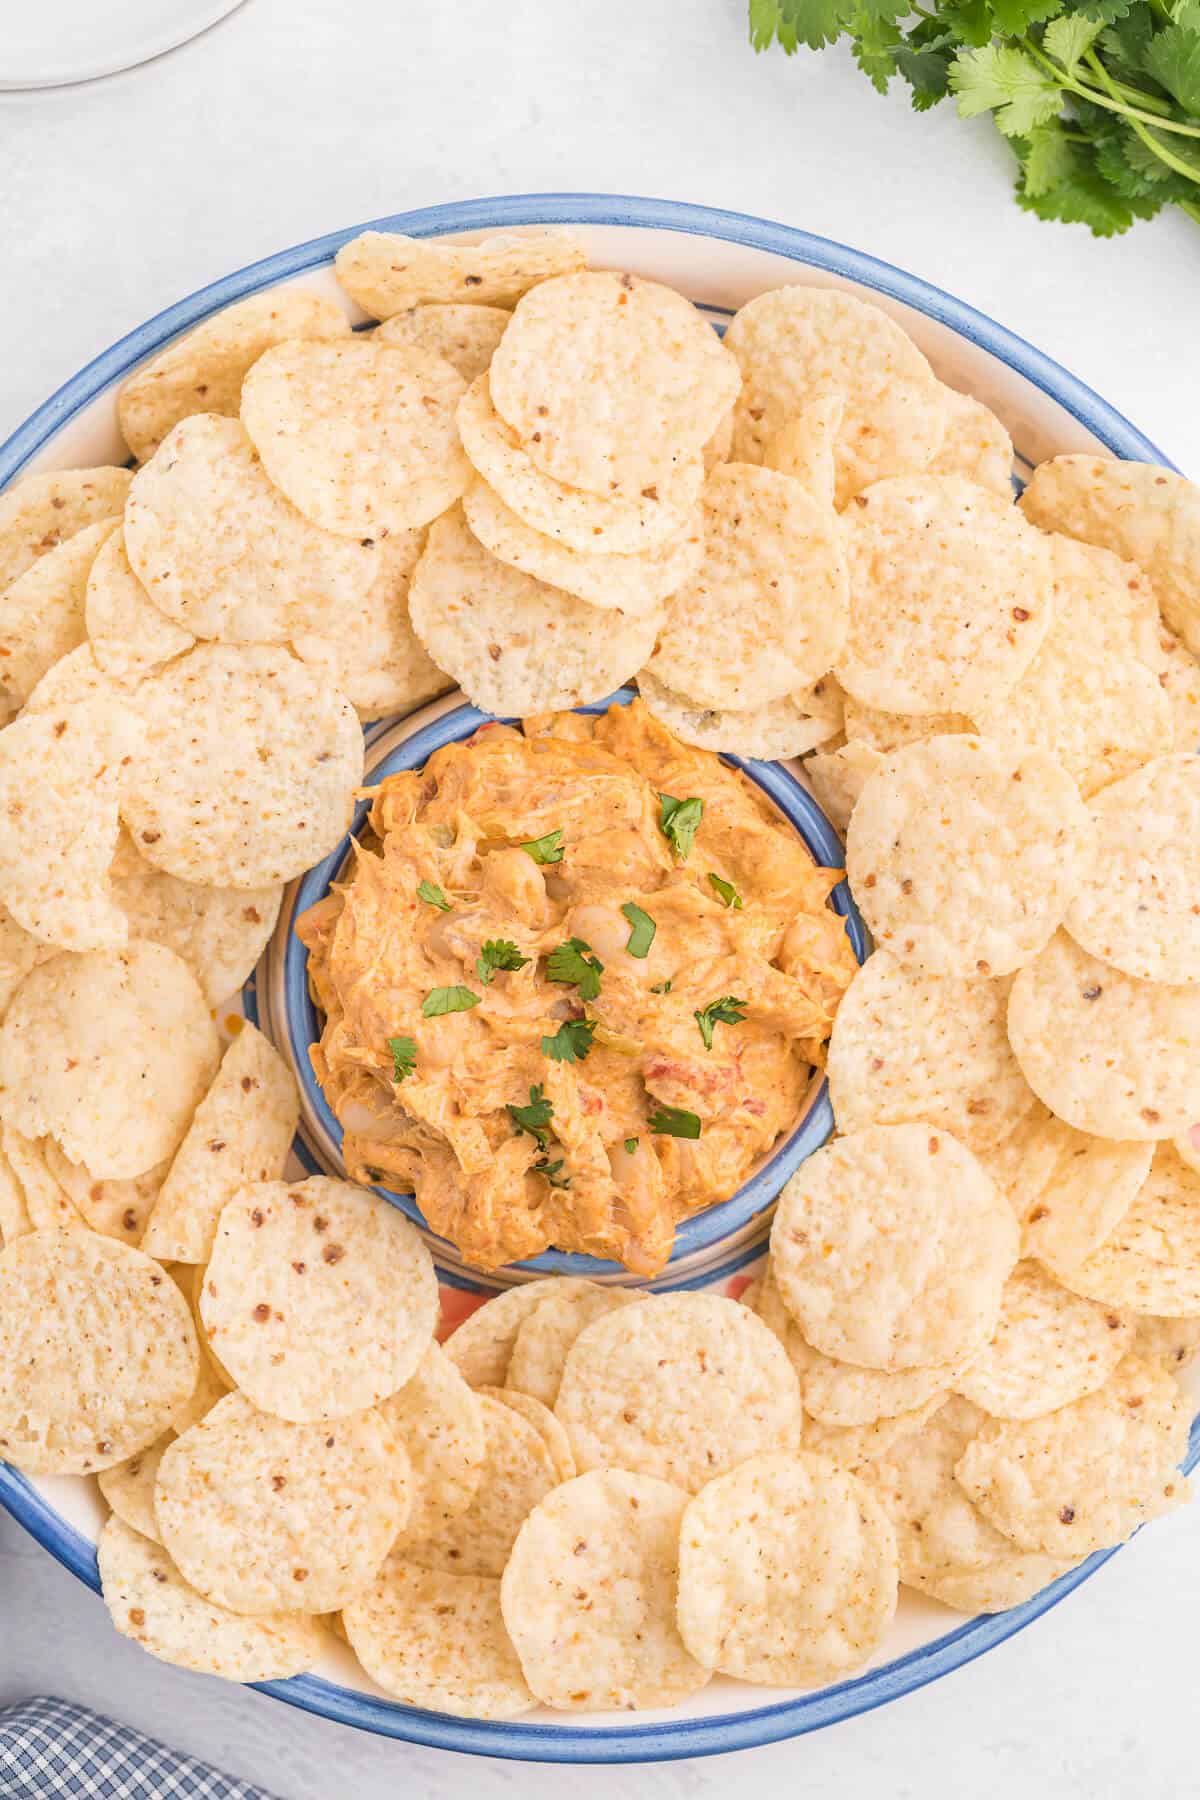 Crockpot White Chili Chicken Dip - Your favorite soup is now your go-to appetizer! This simple dip is packed with Mexican flavor from cilantro, cumin, green chiles, white beans, and taco seasoning.